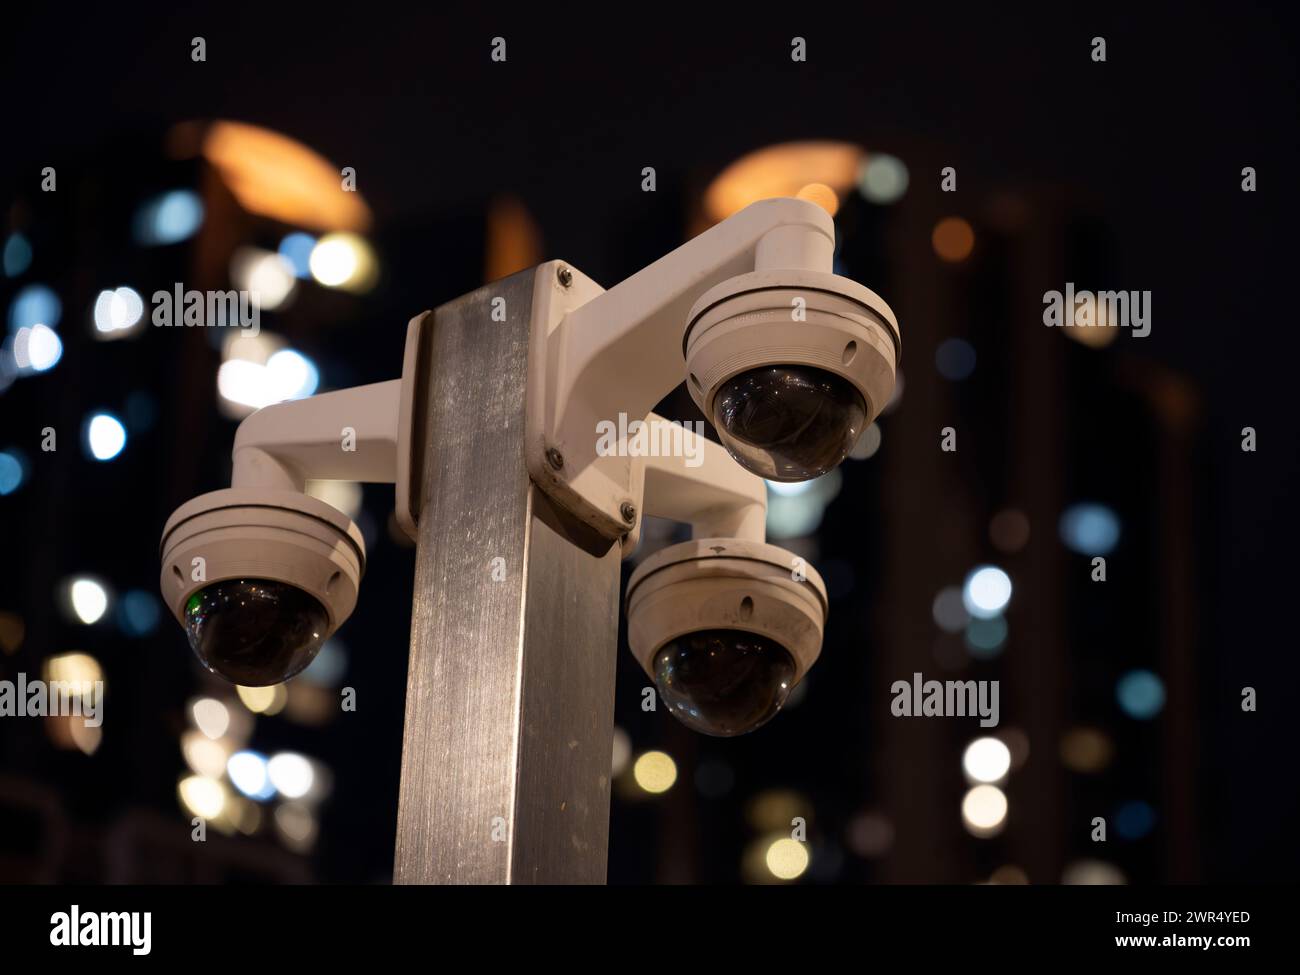 Hong Kong plans to install 2,000 CCTV cameras in densely populated parts and high-crime areas to combat crimes and ensure residents safety. Hong Kong, Stock Photo